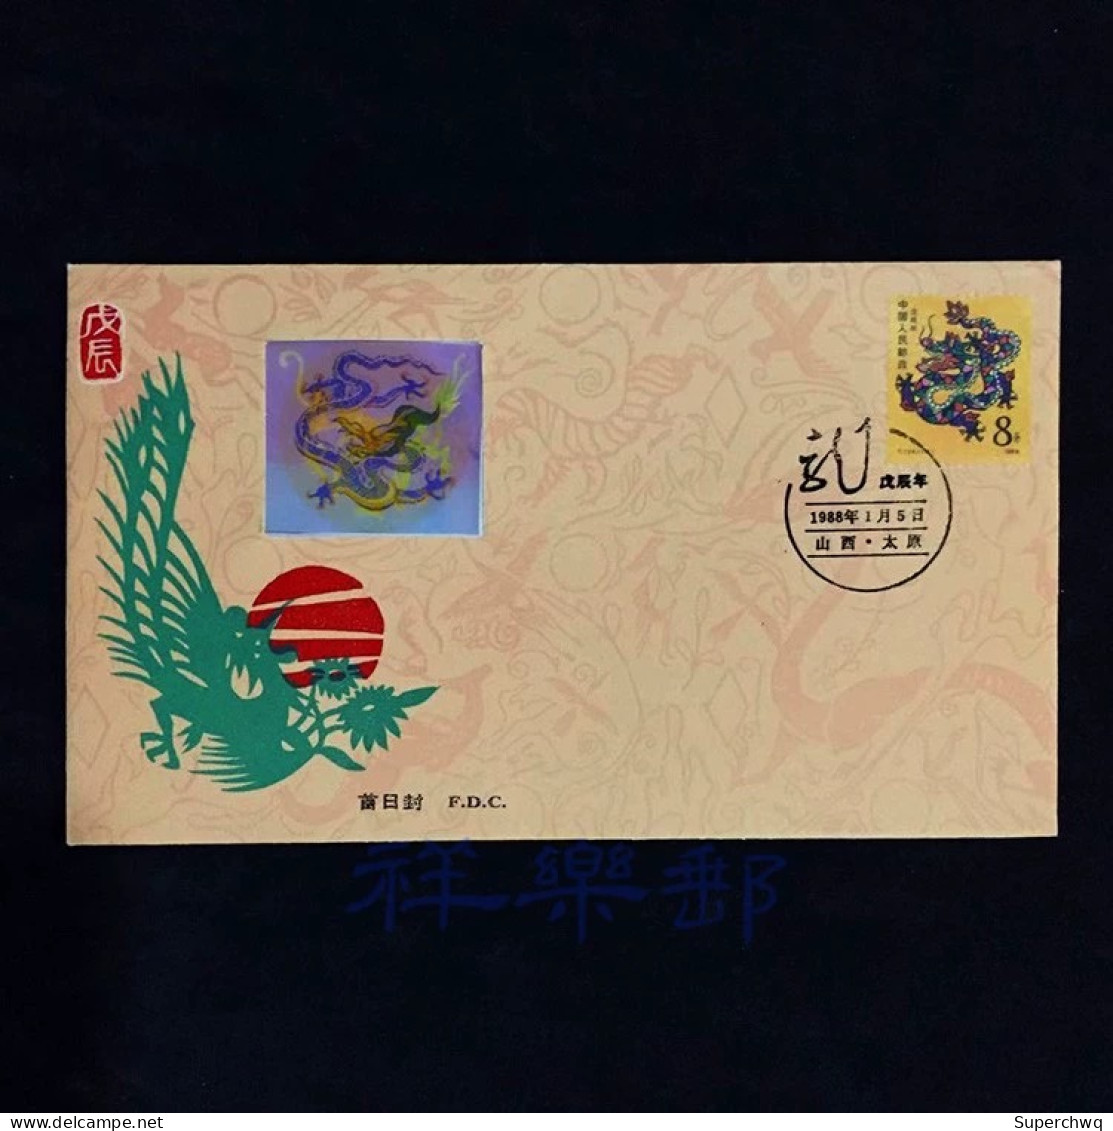 China FDC,In 1988, T124, The First Day Cover Of Stamps Inlaid With Phantom Pictures In The The Year Of The Loong Was Iss - 1980-1989